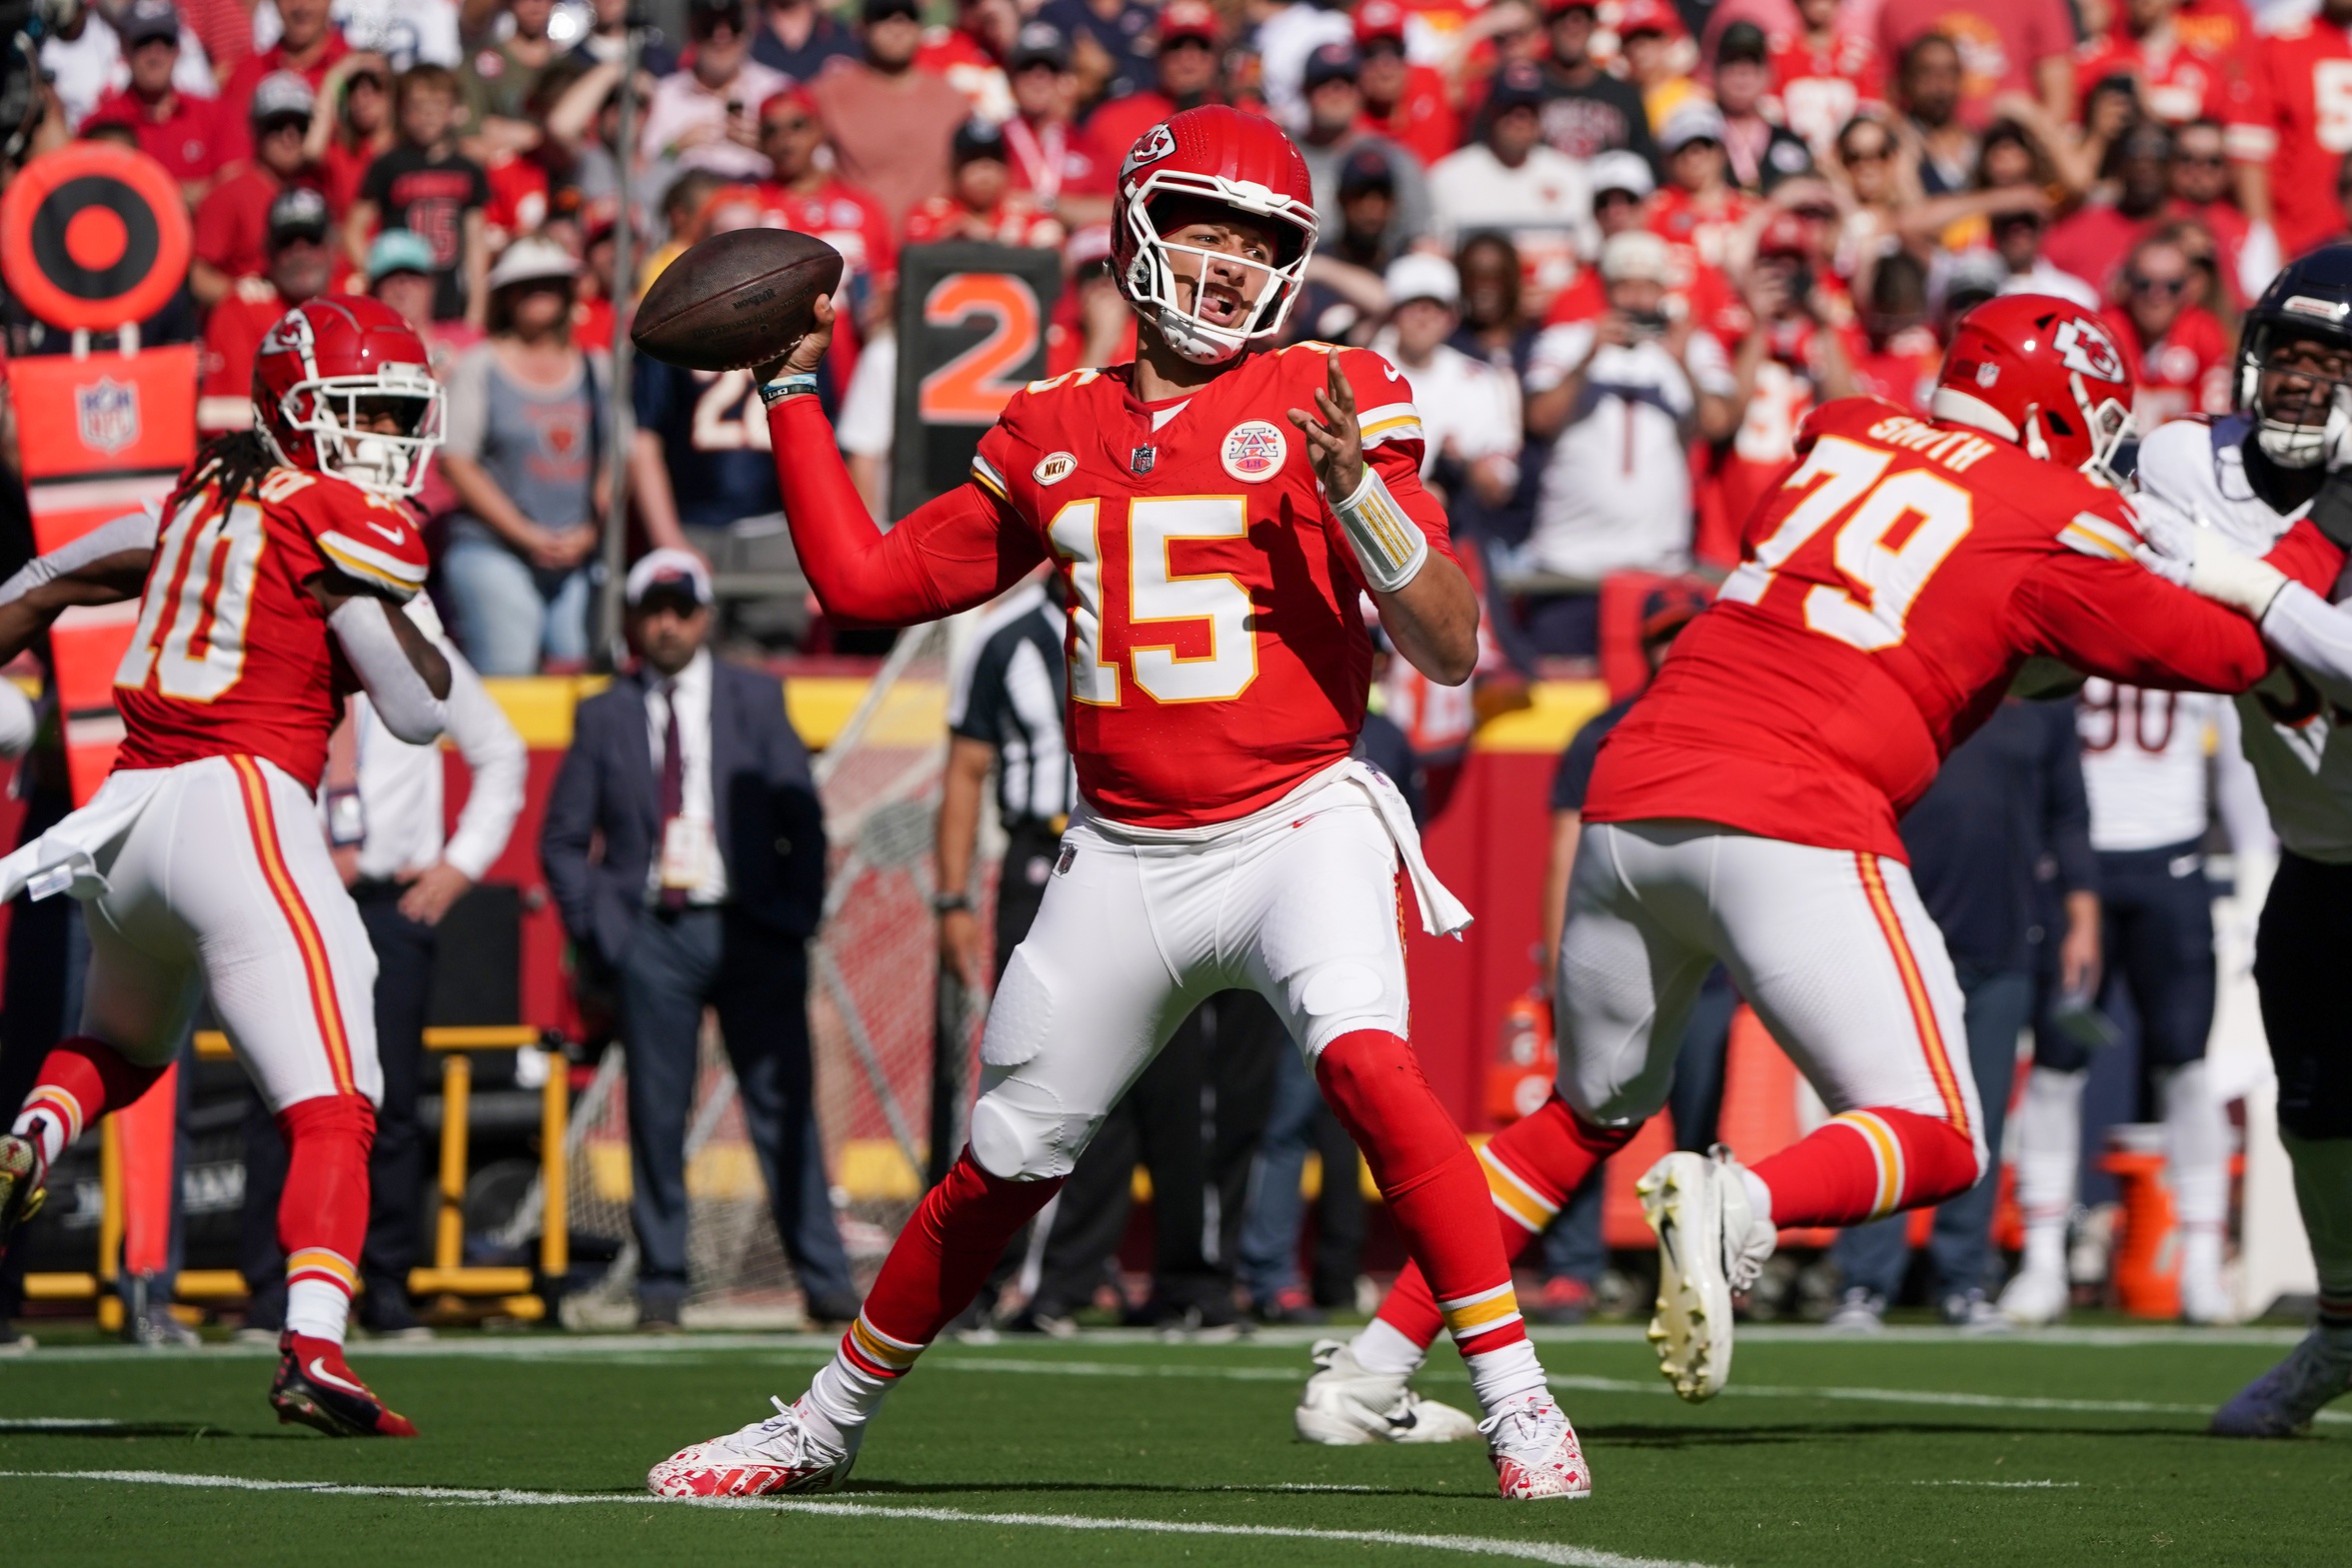 NFL Week 1 Betting Odds: Chiefs Favored While Jets Catch Points